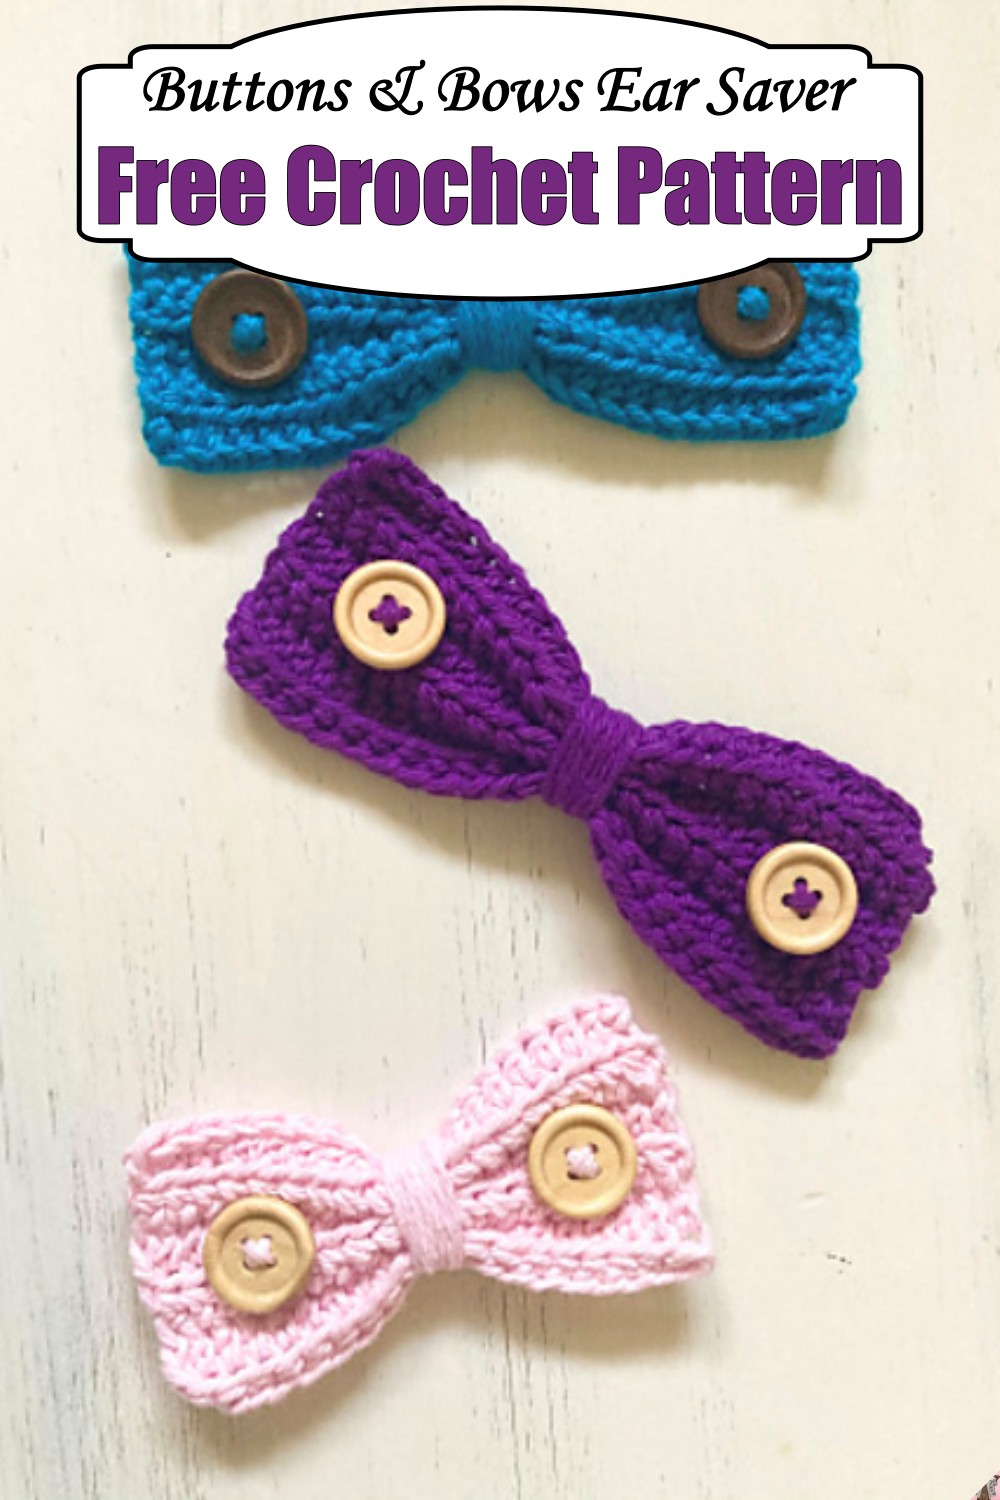 Buttons & Bows Ear Saver